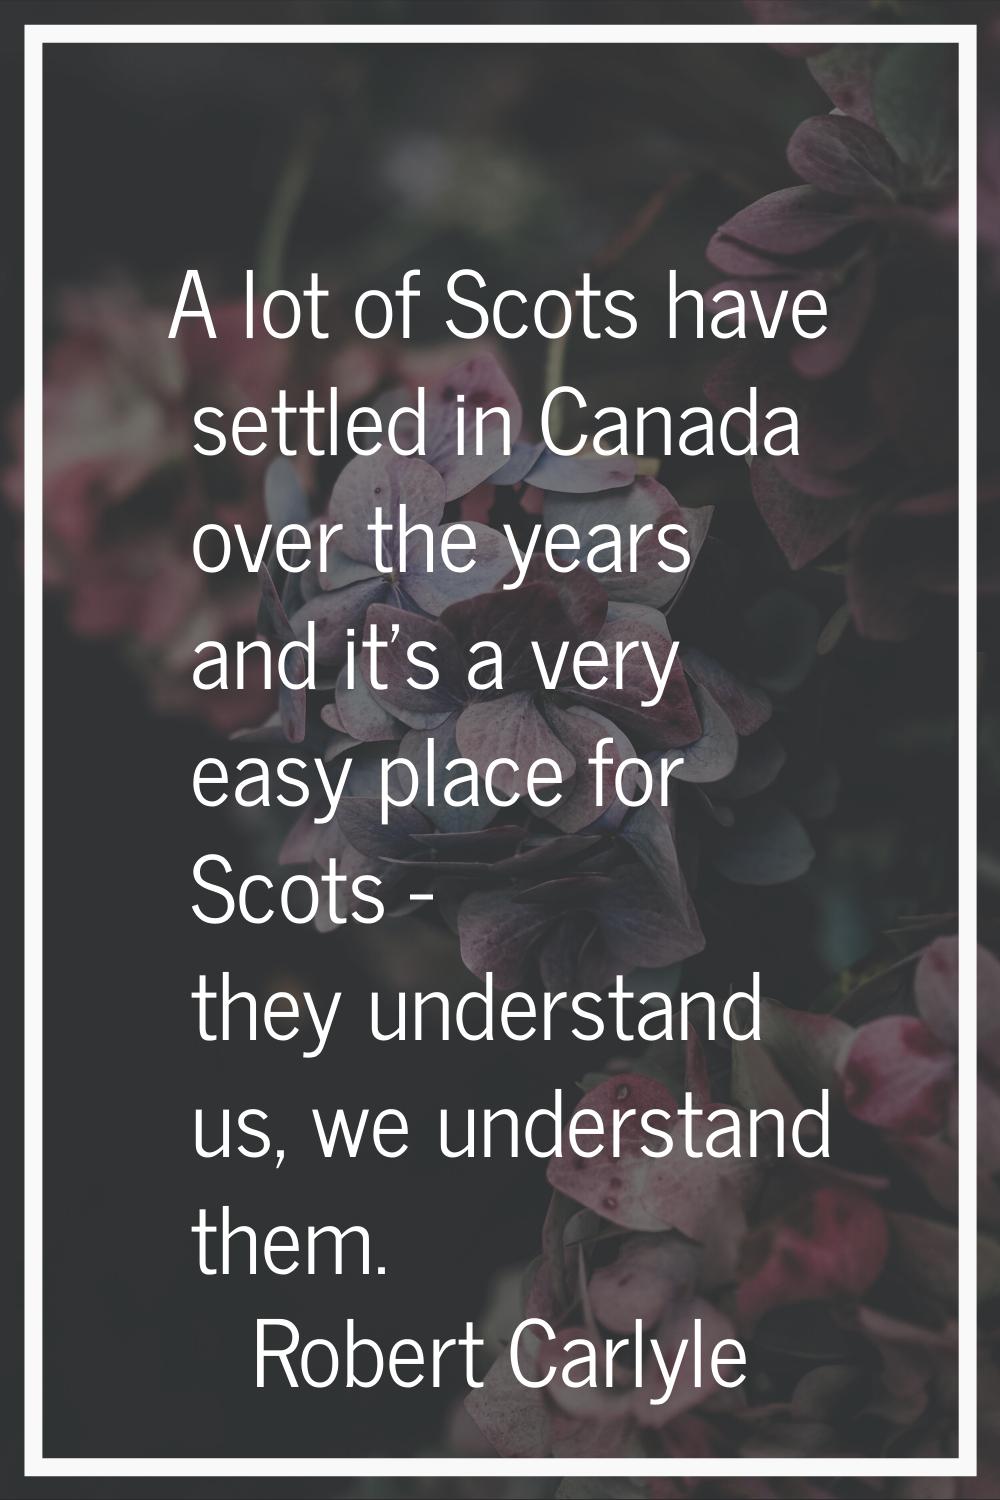 A lot of Scots have settled in Canada over the years and it's a very easy place for Scots - they un